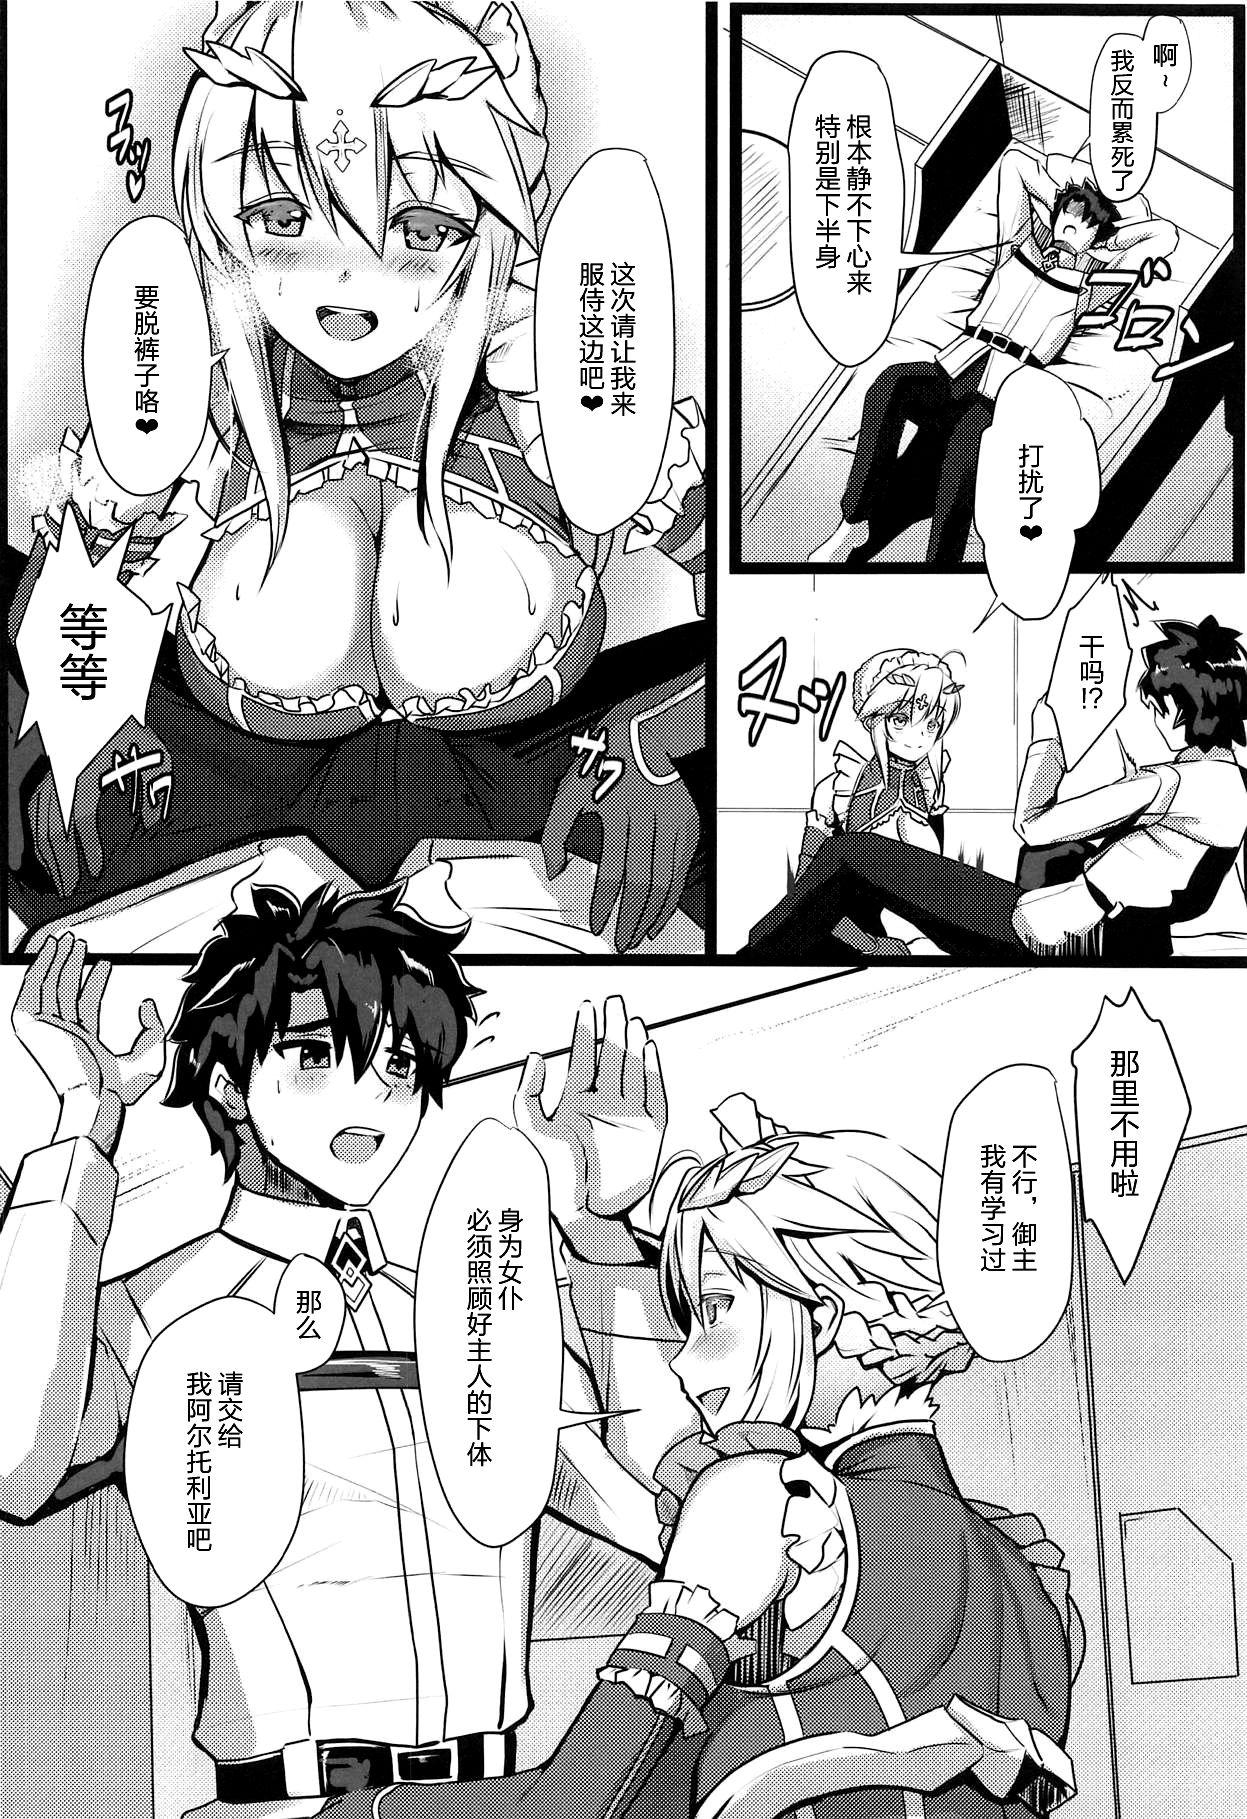 Speculum Chichiue Maid Gohoushi Kyouka Quest - Fate grand order Tribbing - Page 7